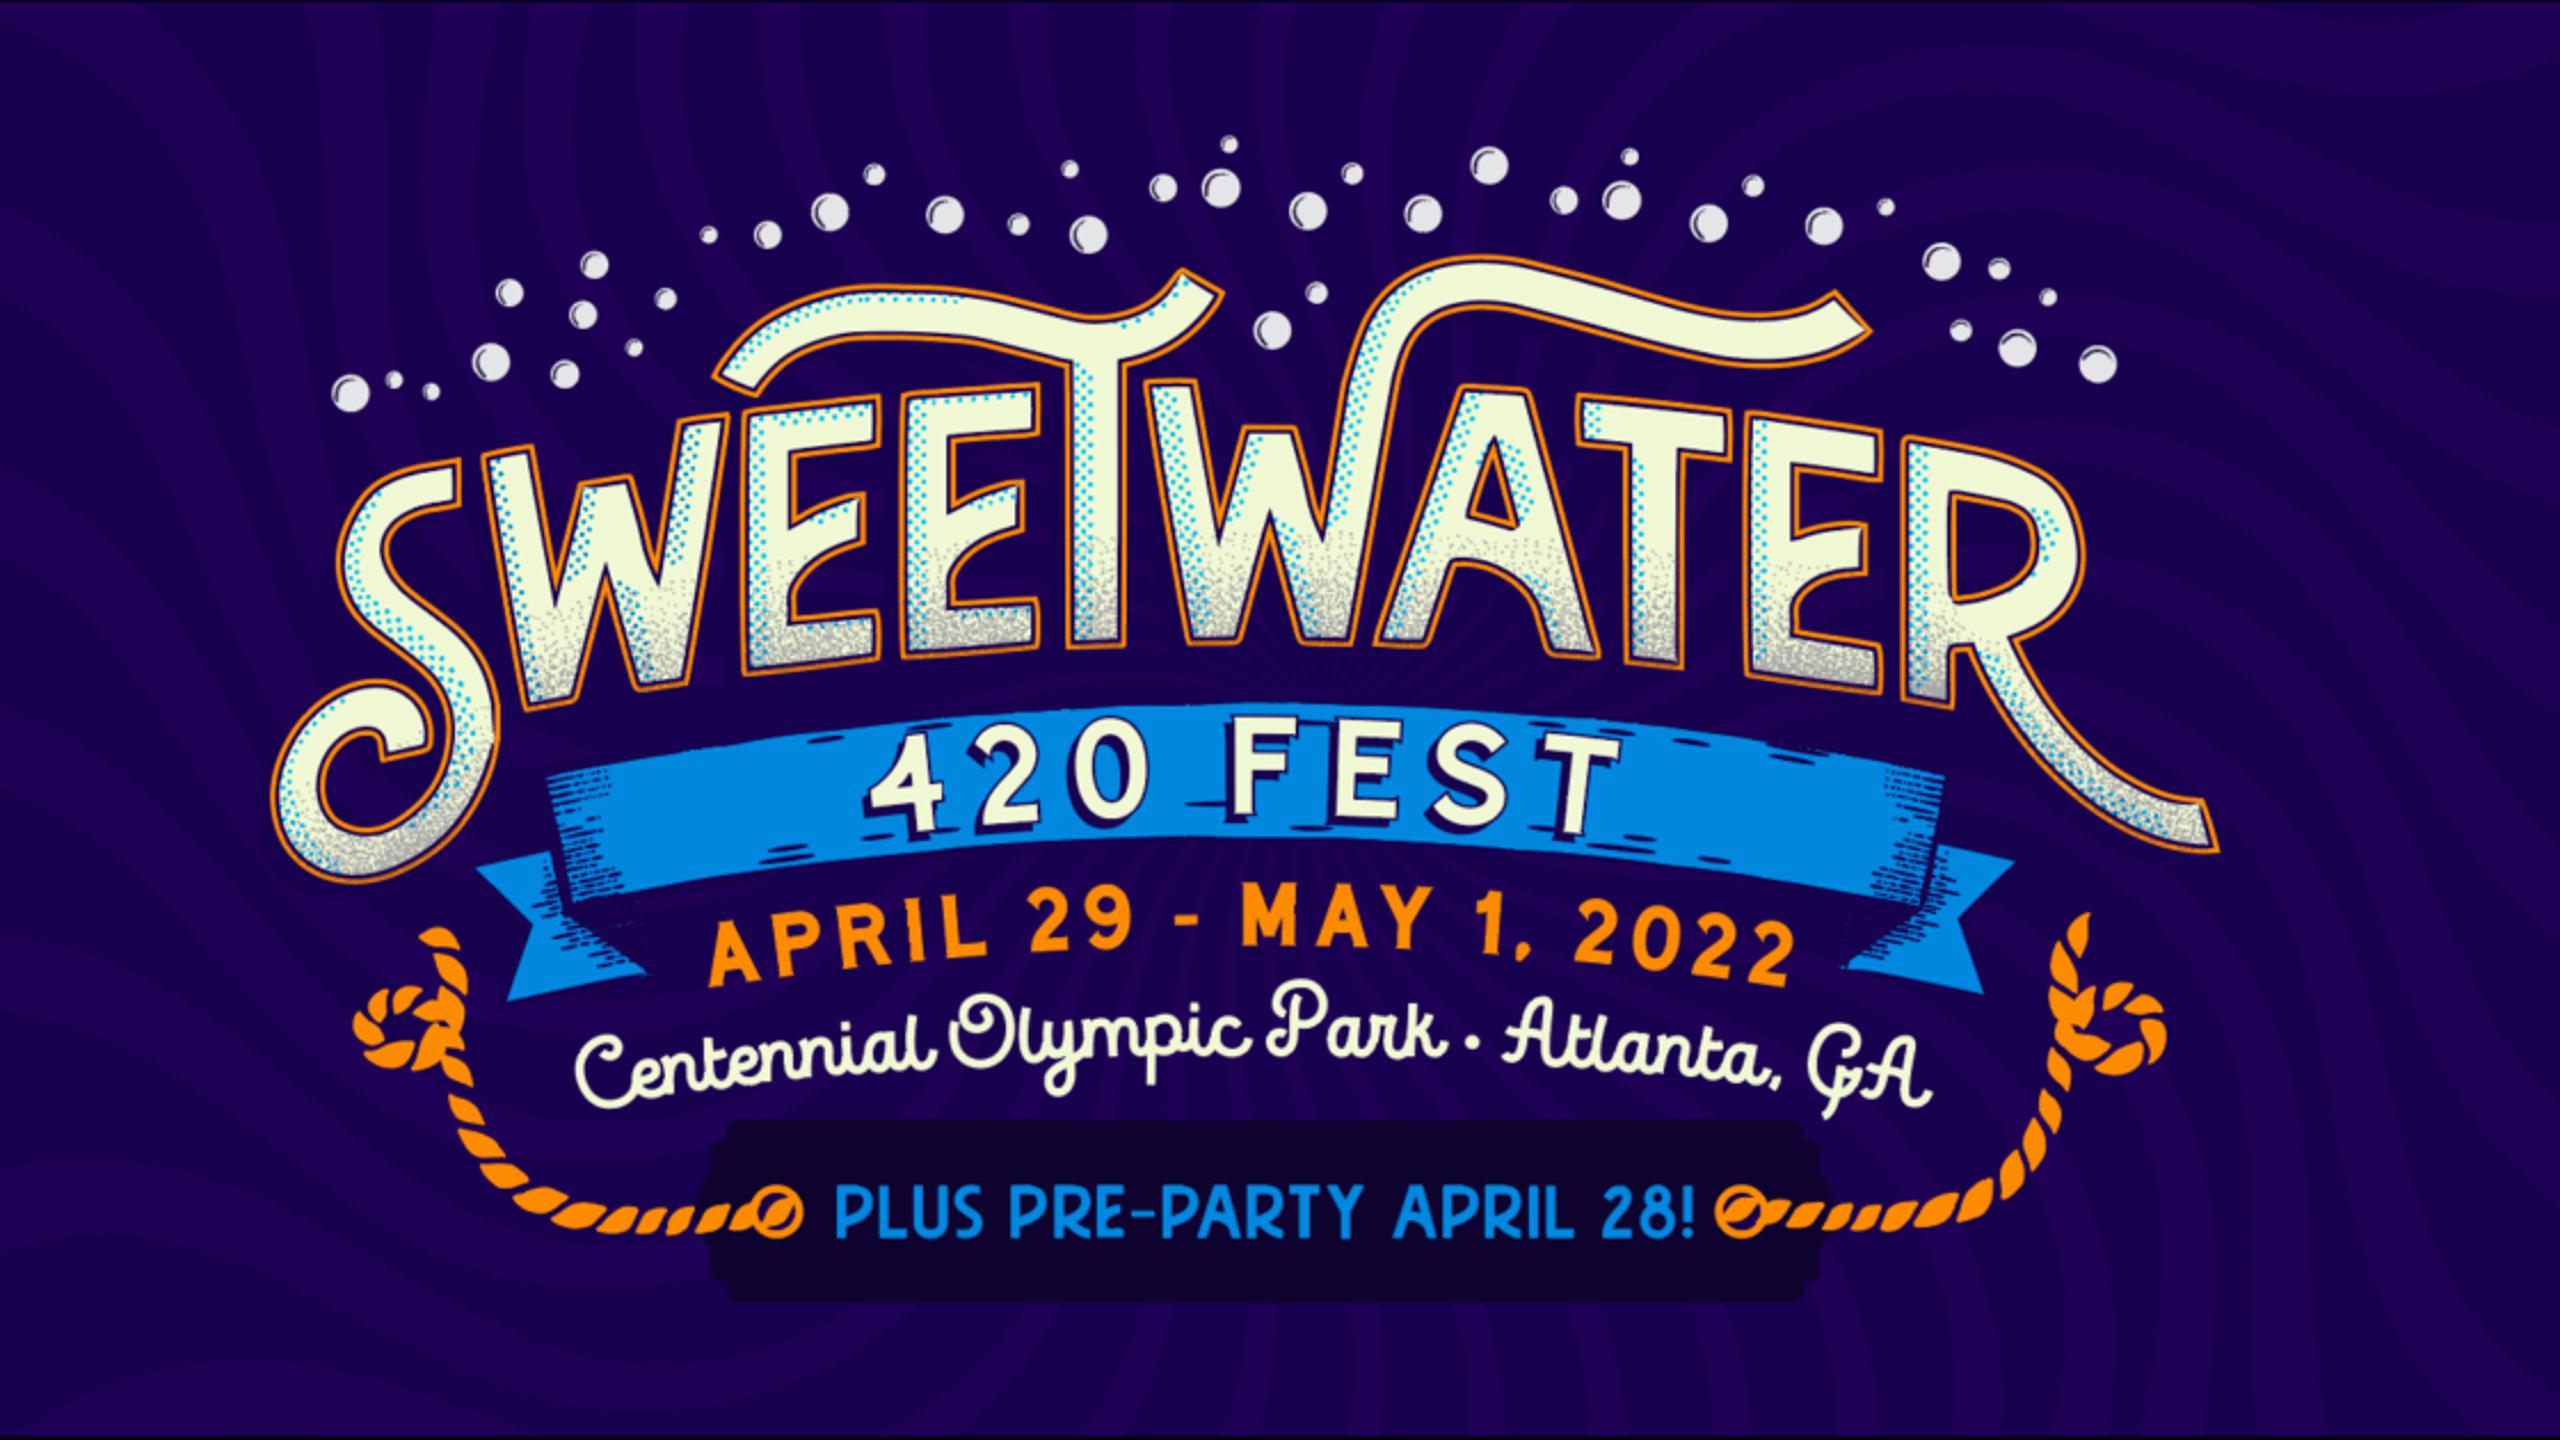 SweetWater 420 Fest 2022. Tickets, lineup, bands for SweetWater 420